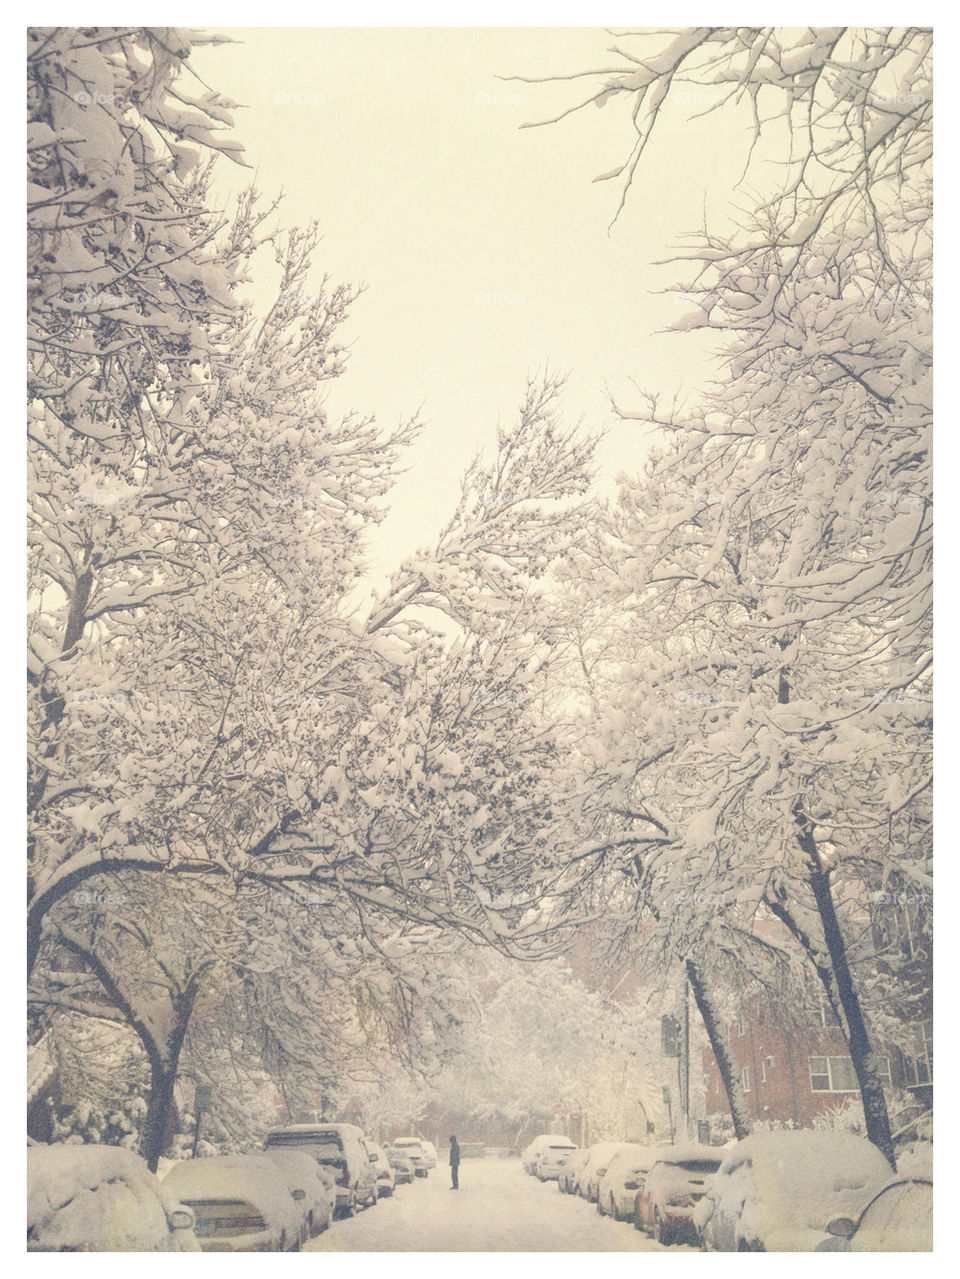 Snow frosted trees